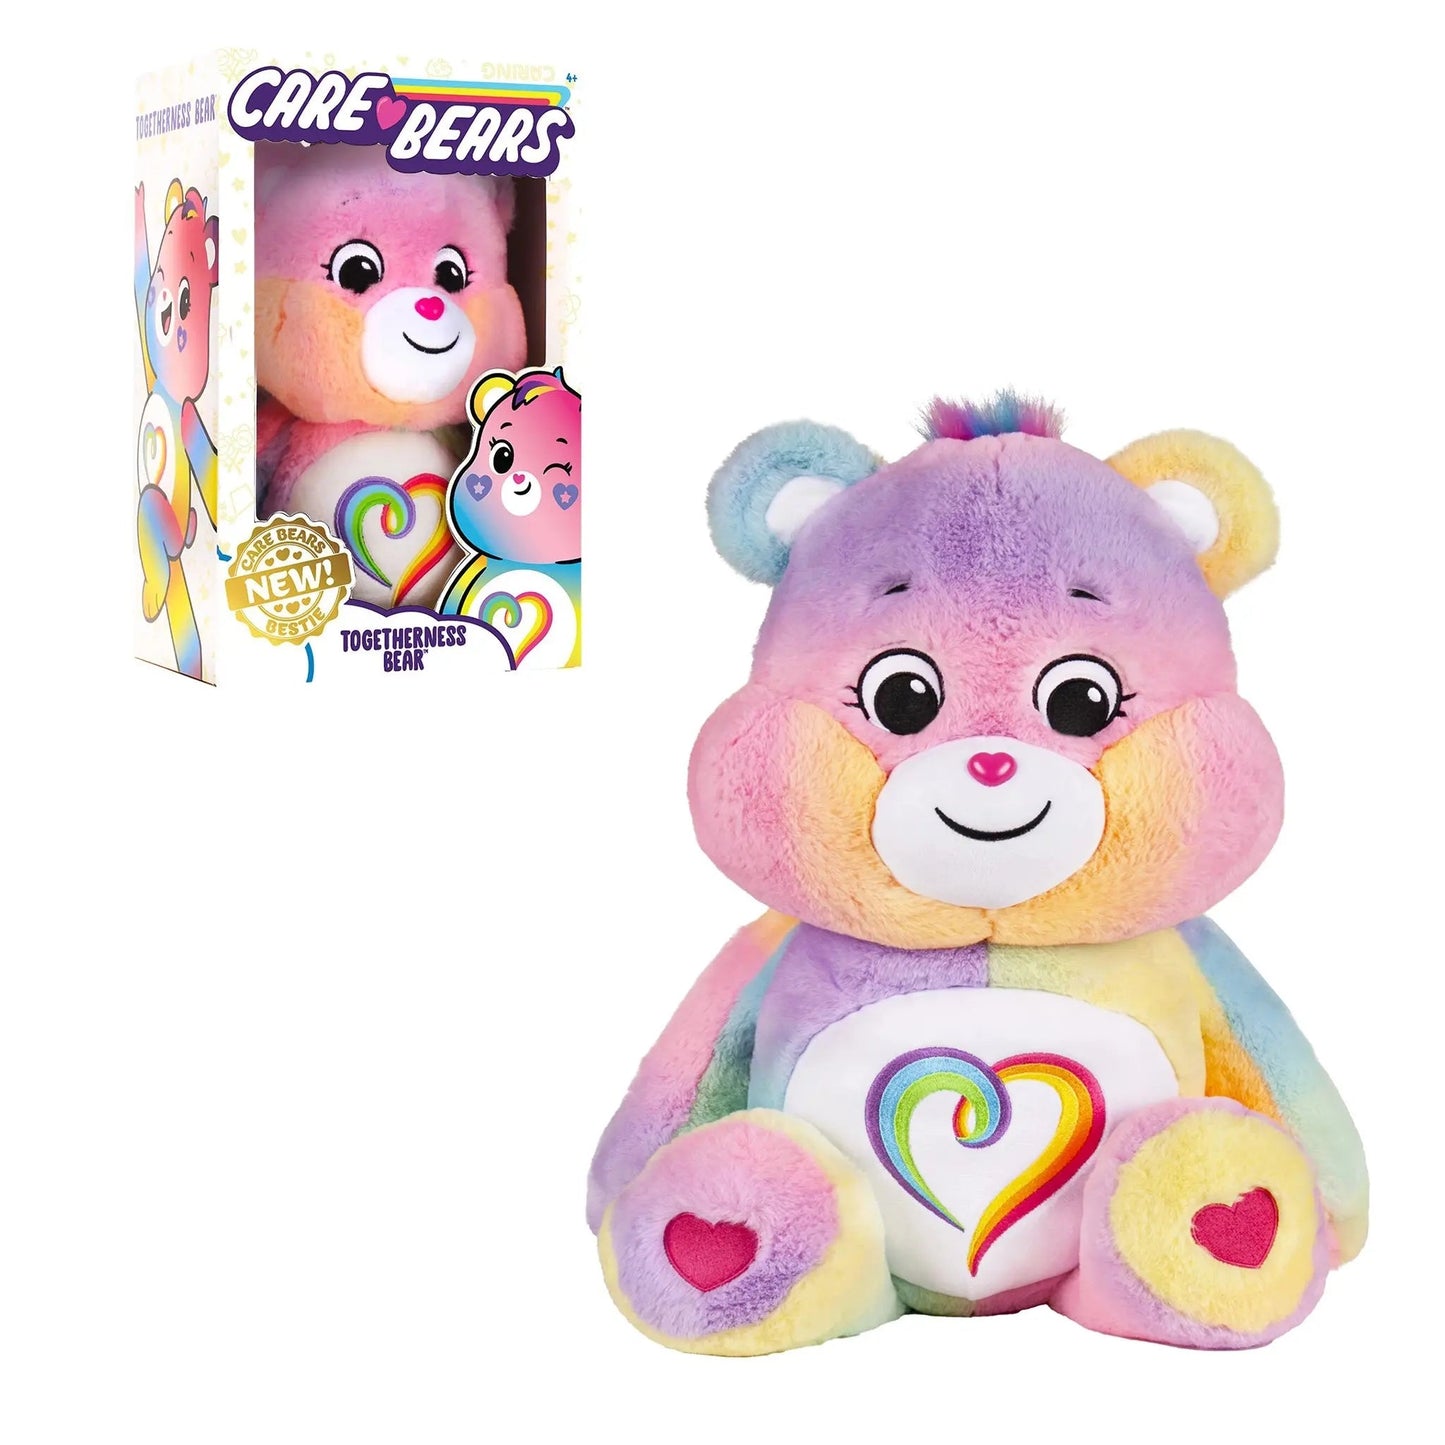 Care Bears 14" - Togetherness Bear - ABGee - The Forgotten Toy Shop